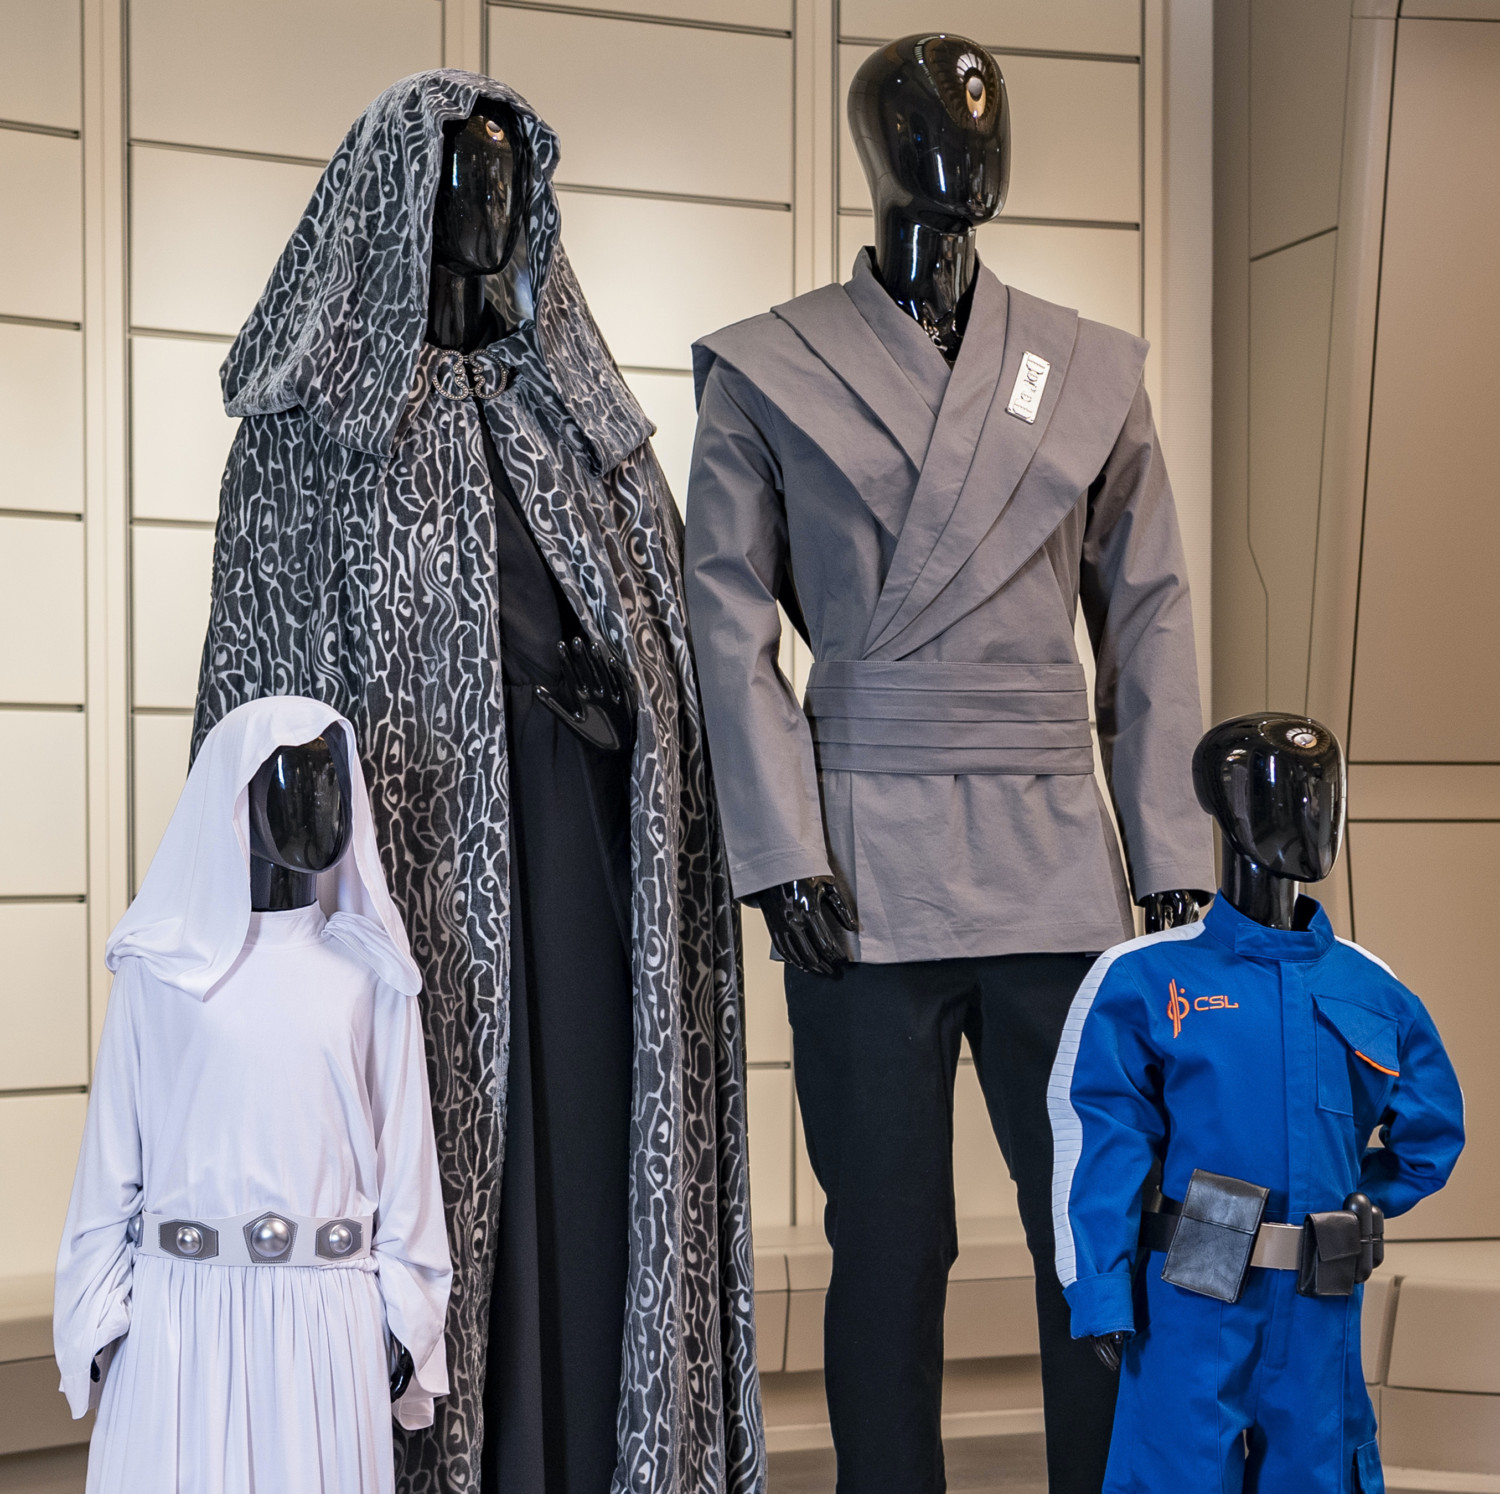 ShopDisney has deluxe Star Wars outfits for Galactic Starcruiser guests